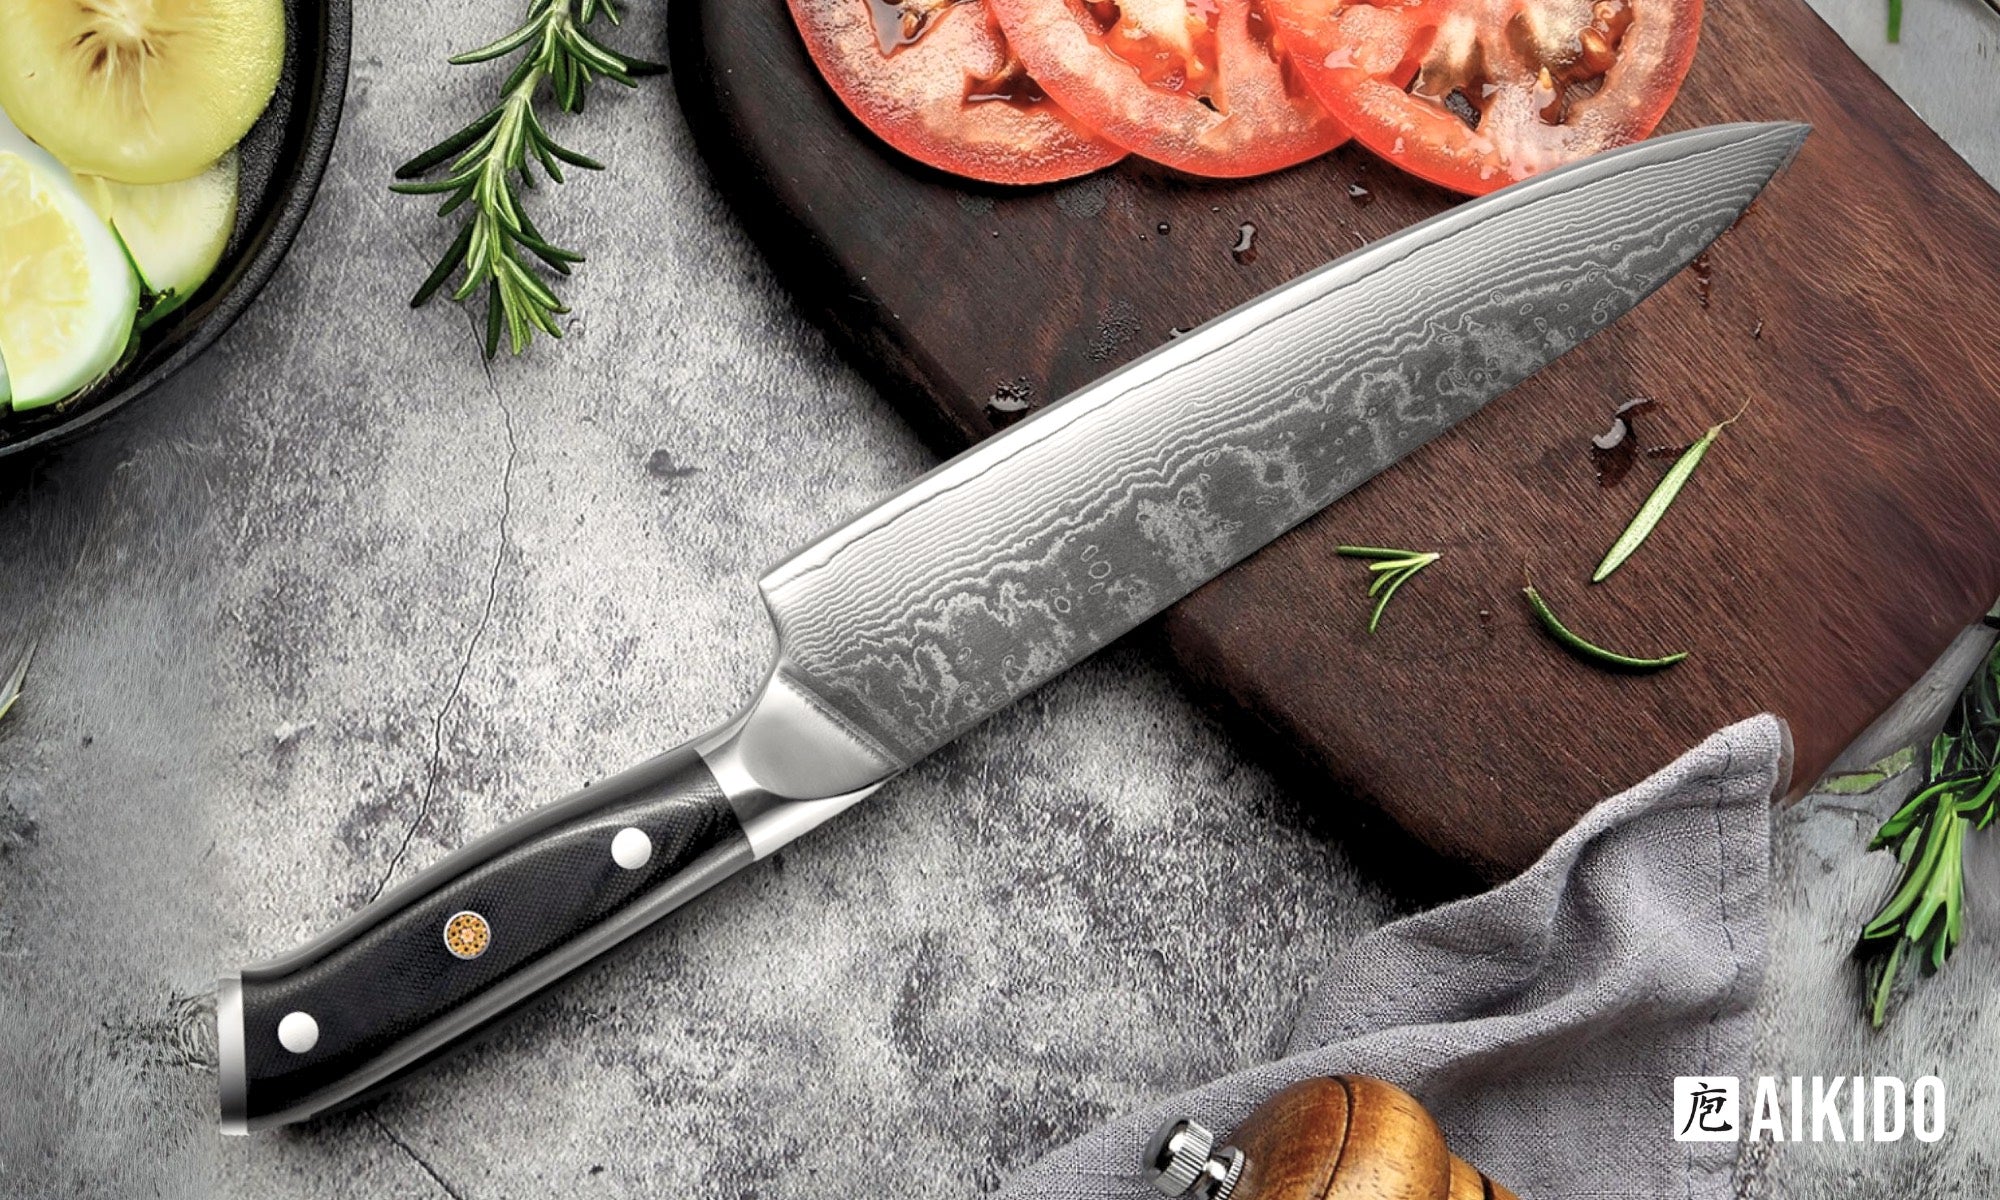 8'' Bread Knife Kitchen Stainless Steel Japanese Damascus Style Chef's Knife